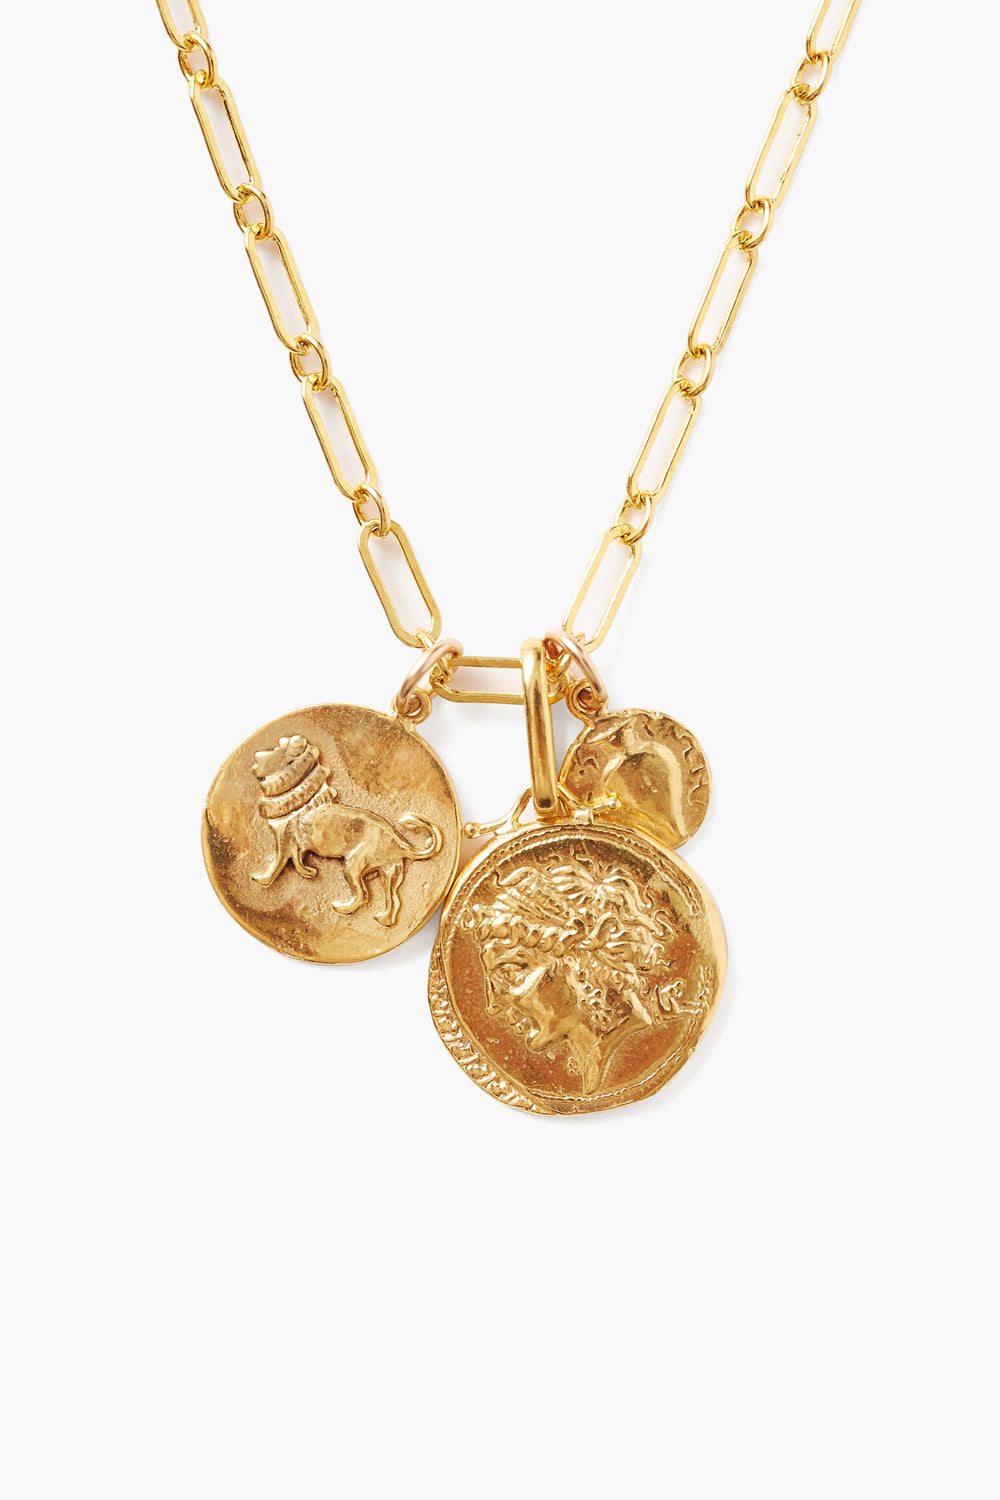 YELLOW GOLD ADJUSTABLE COIN PENDANT NECKLACE - Kingfisher Road - Online Boutique